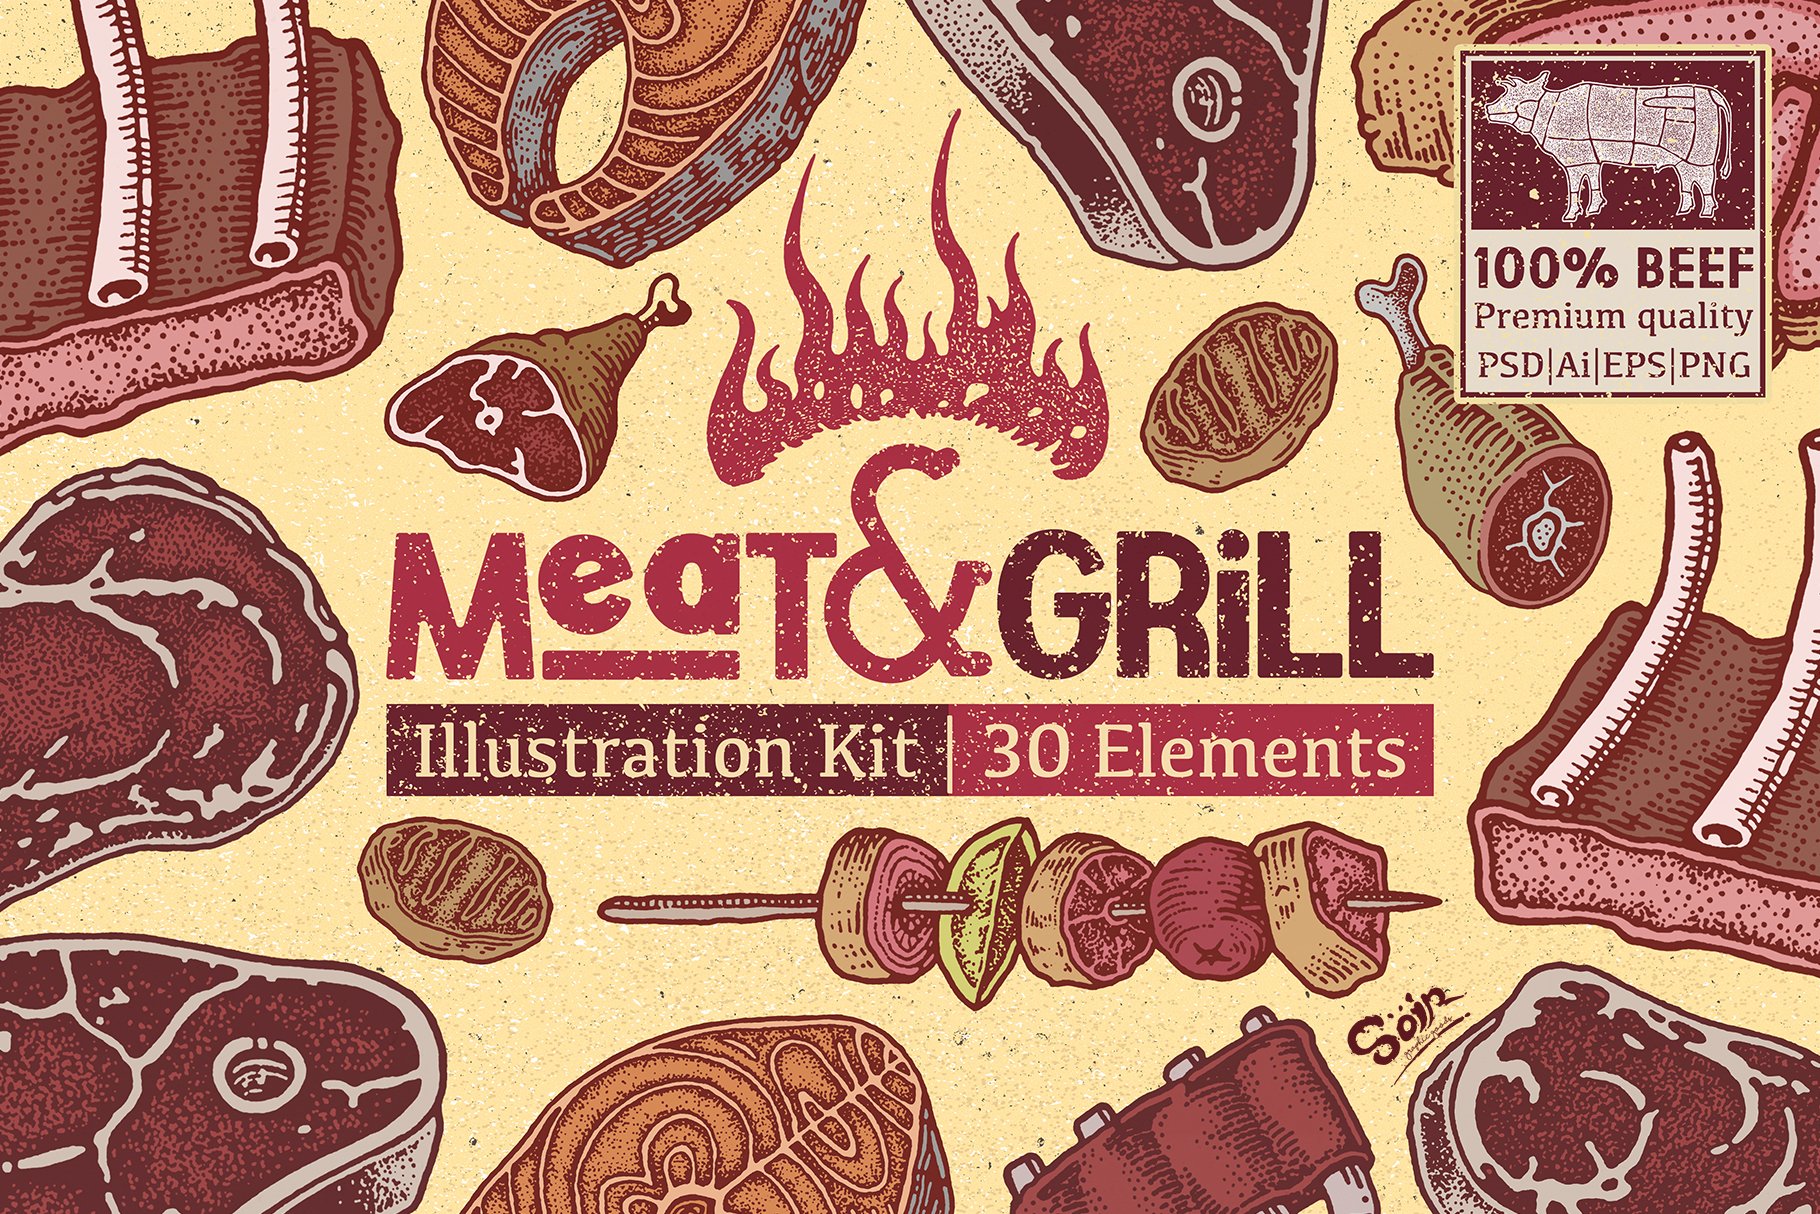 MEAT AND GRILL cover image.